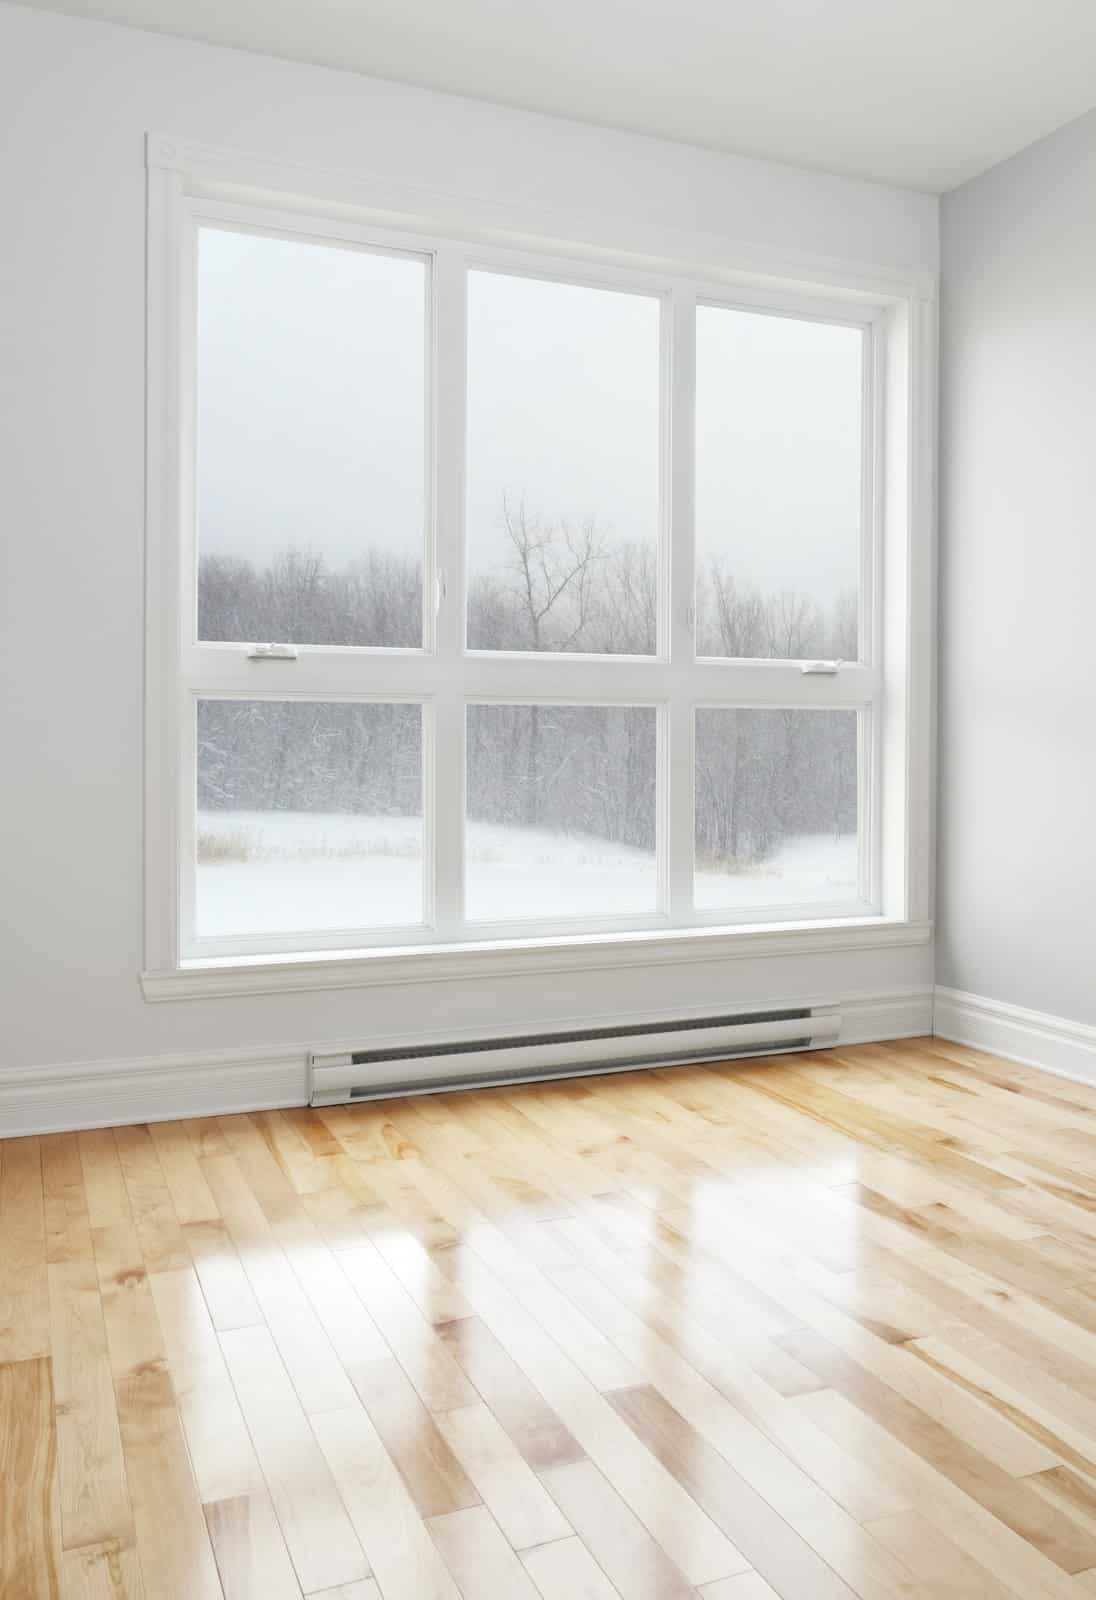 AdobeStock 46825009 How to Protect Your Hardwood Floors from Winter Weather